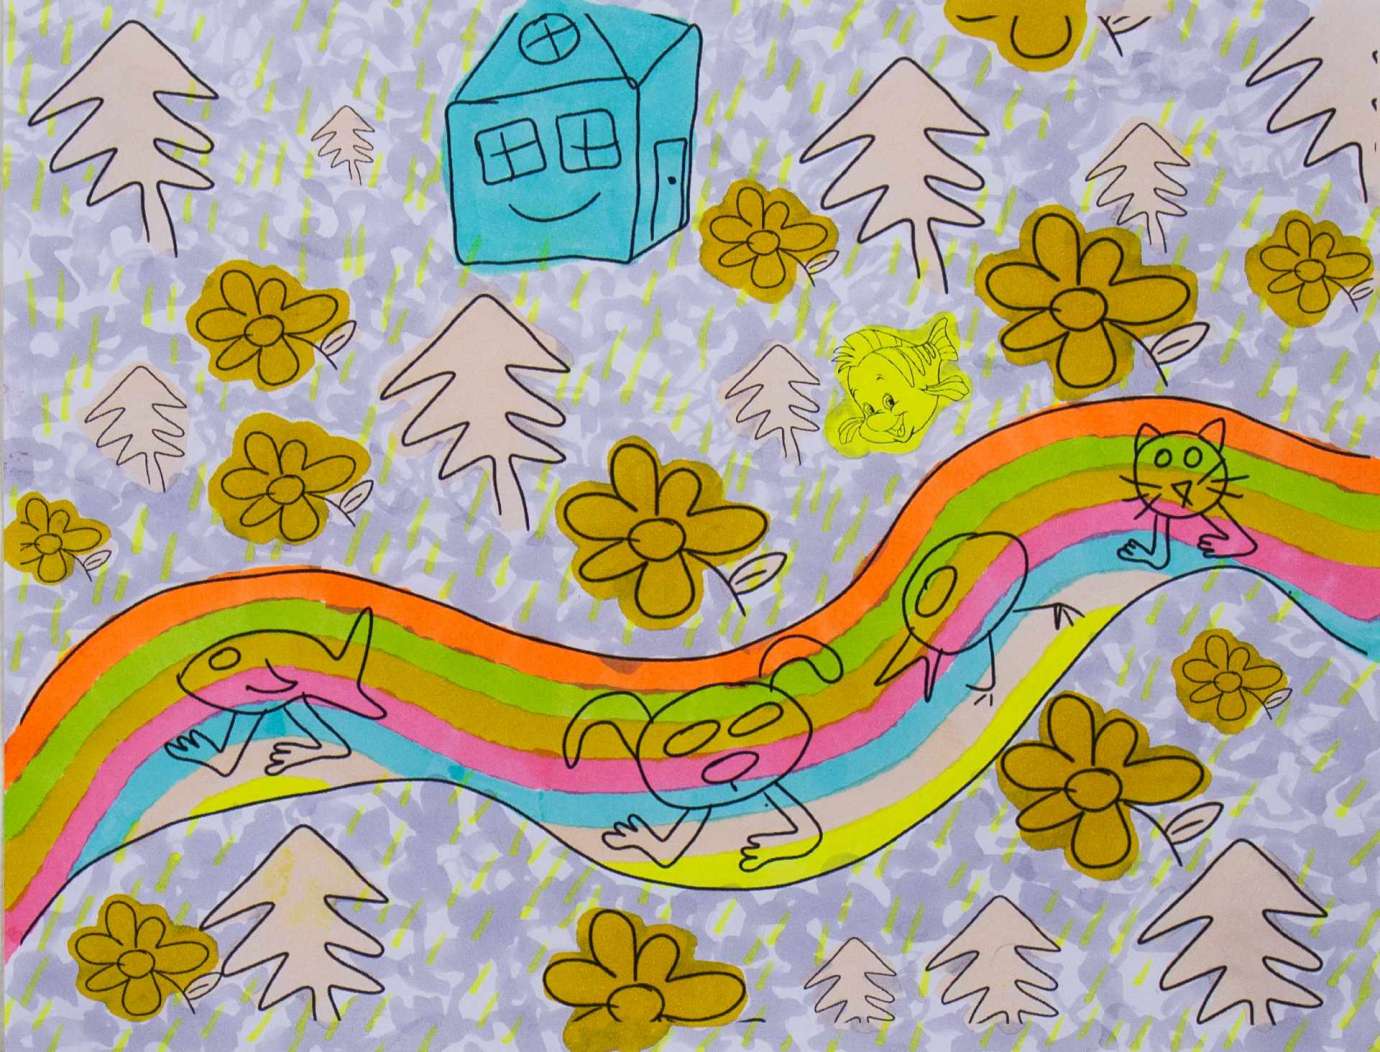 drawing of a blue house on a purple background with outlines of trees and yellow flowers